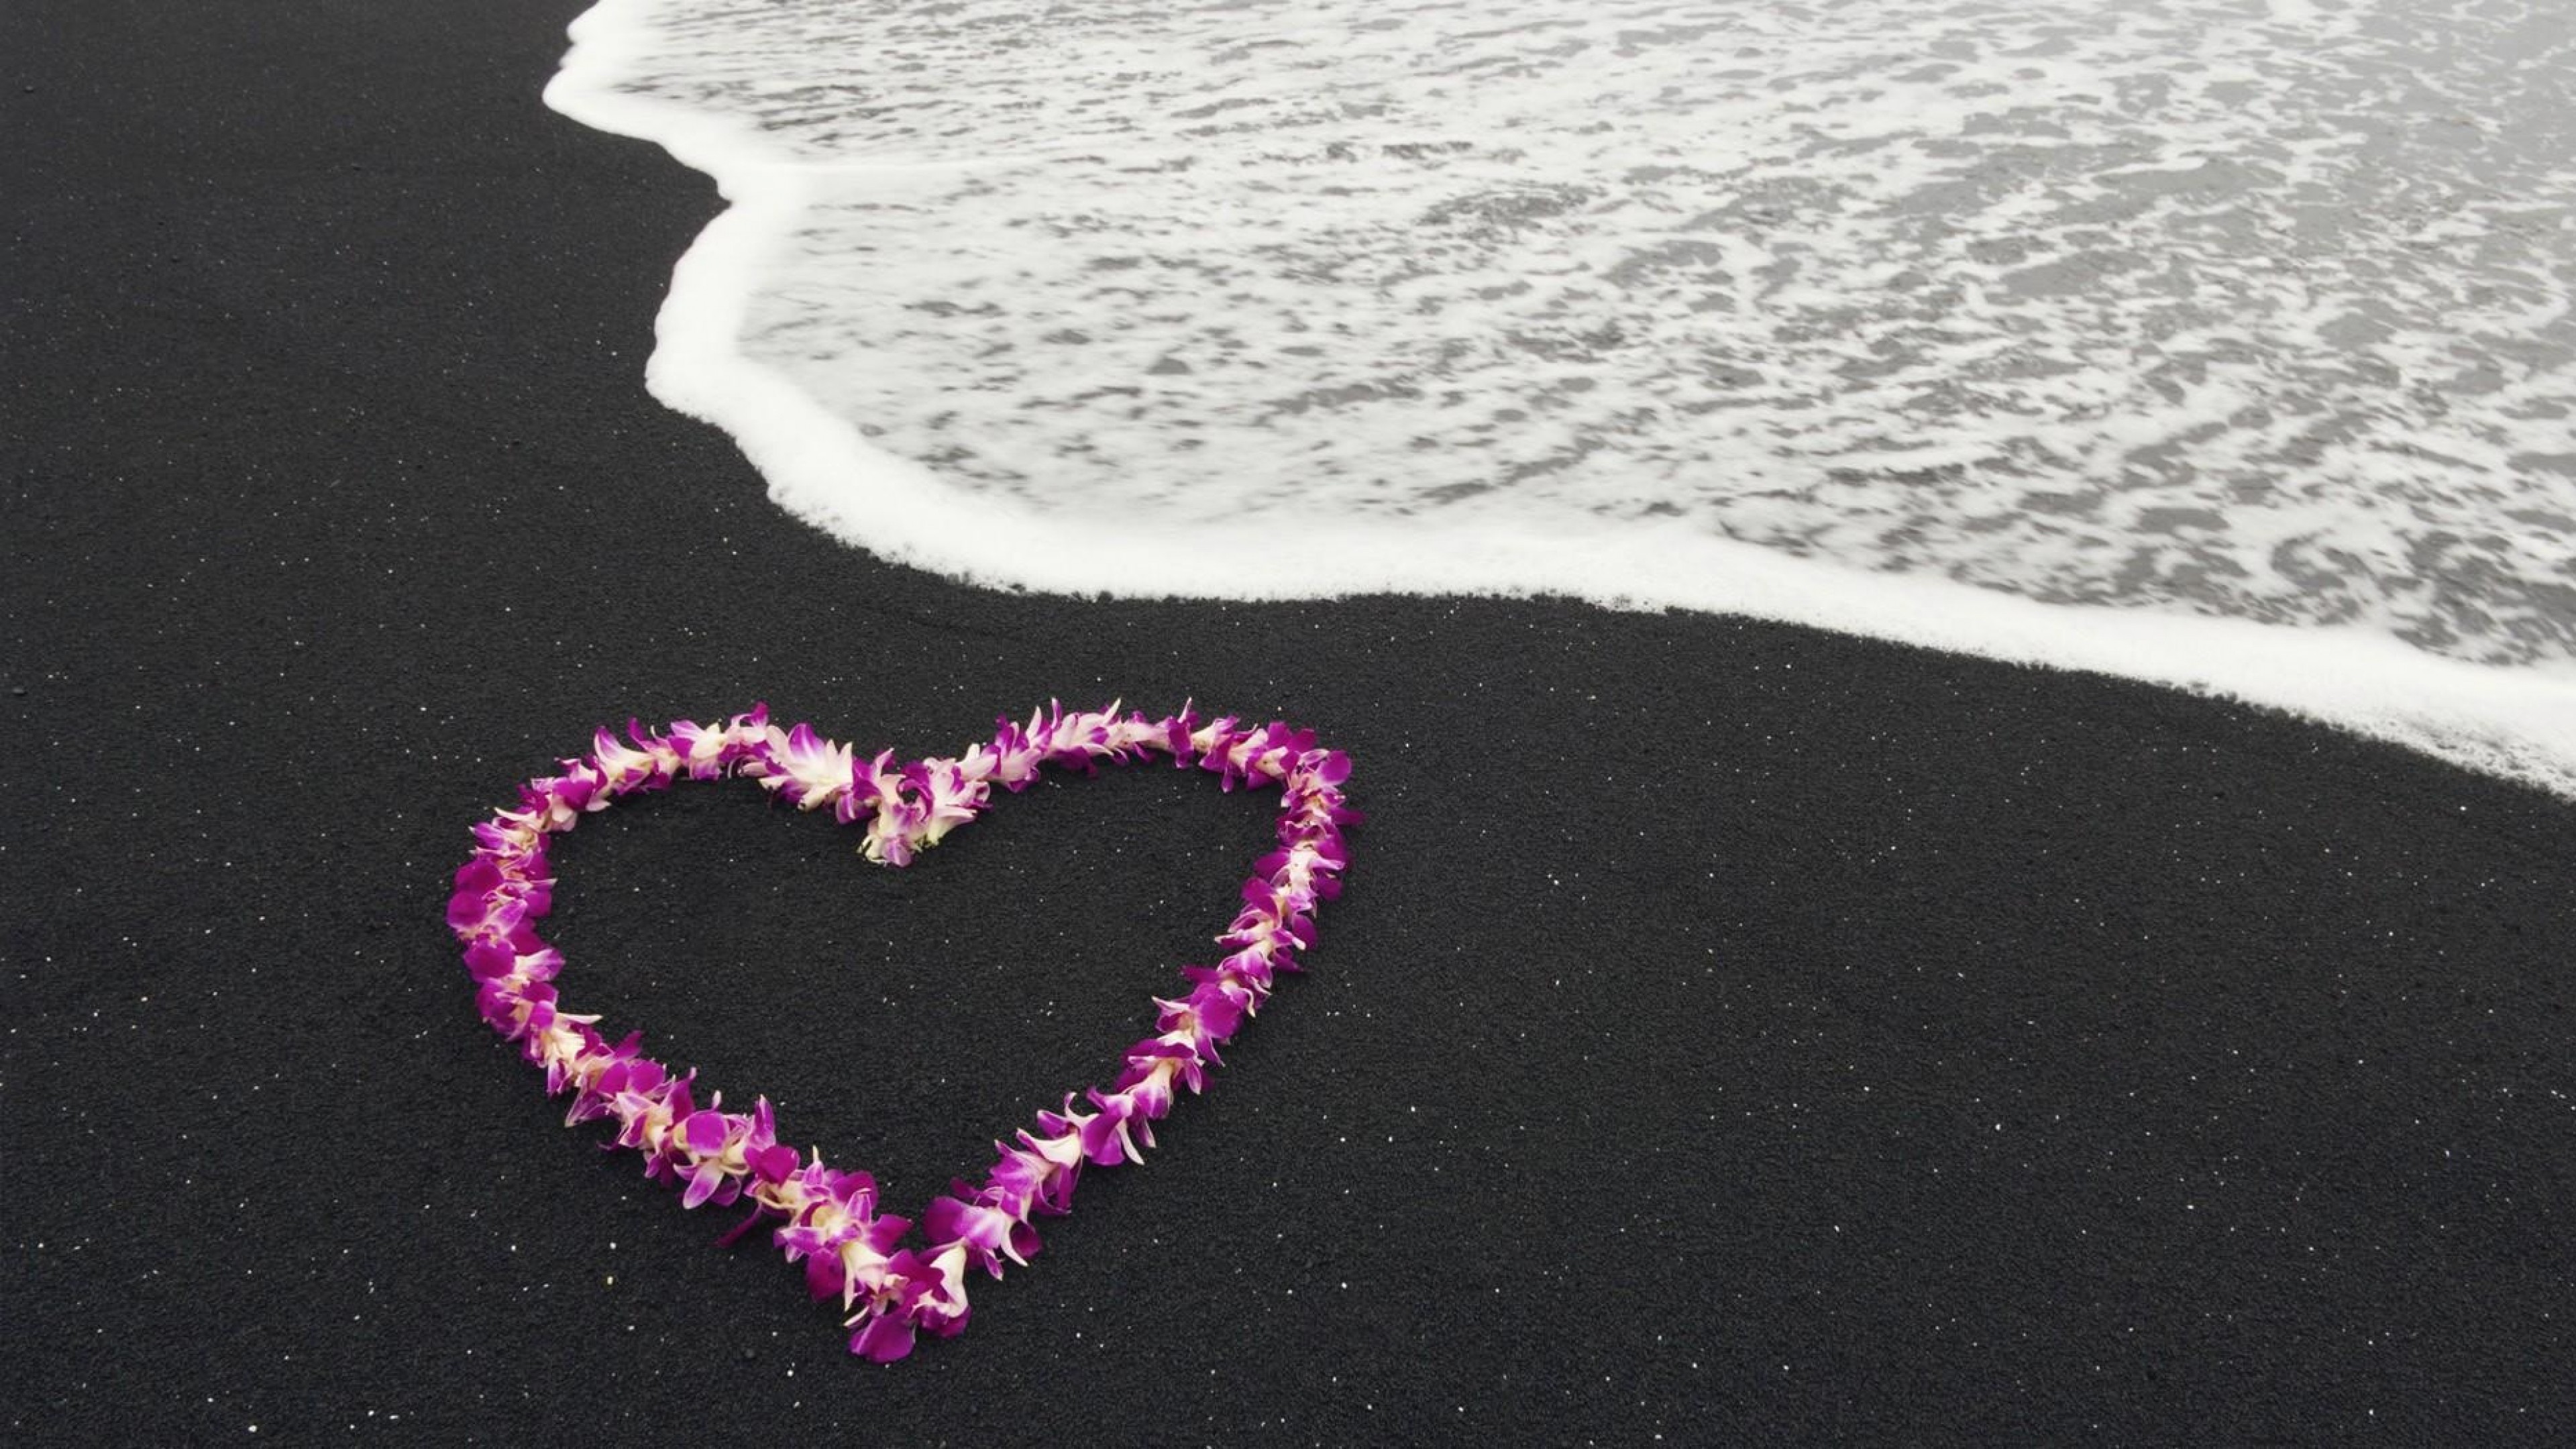 3840x2160 Preview wallpaper valentines day, holiday, love, hearts, flowers, beach,  water